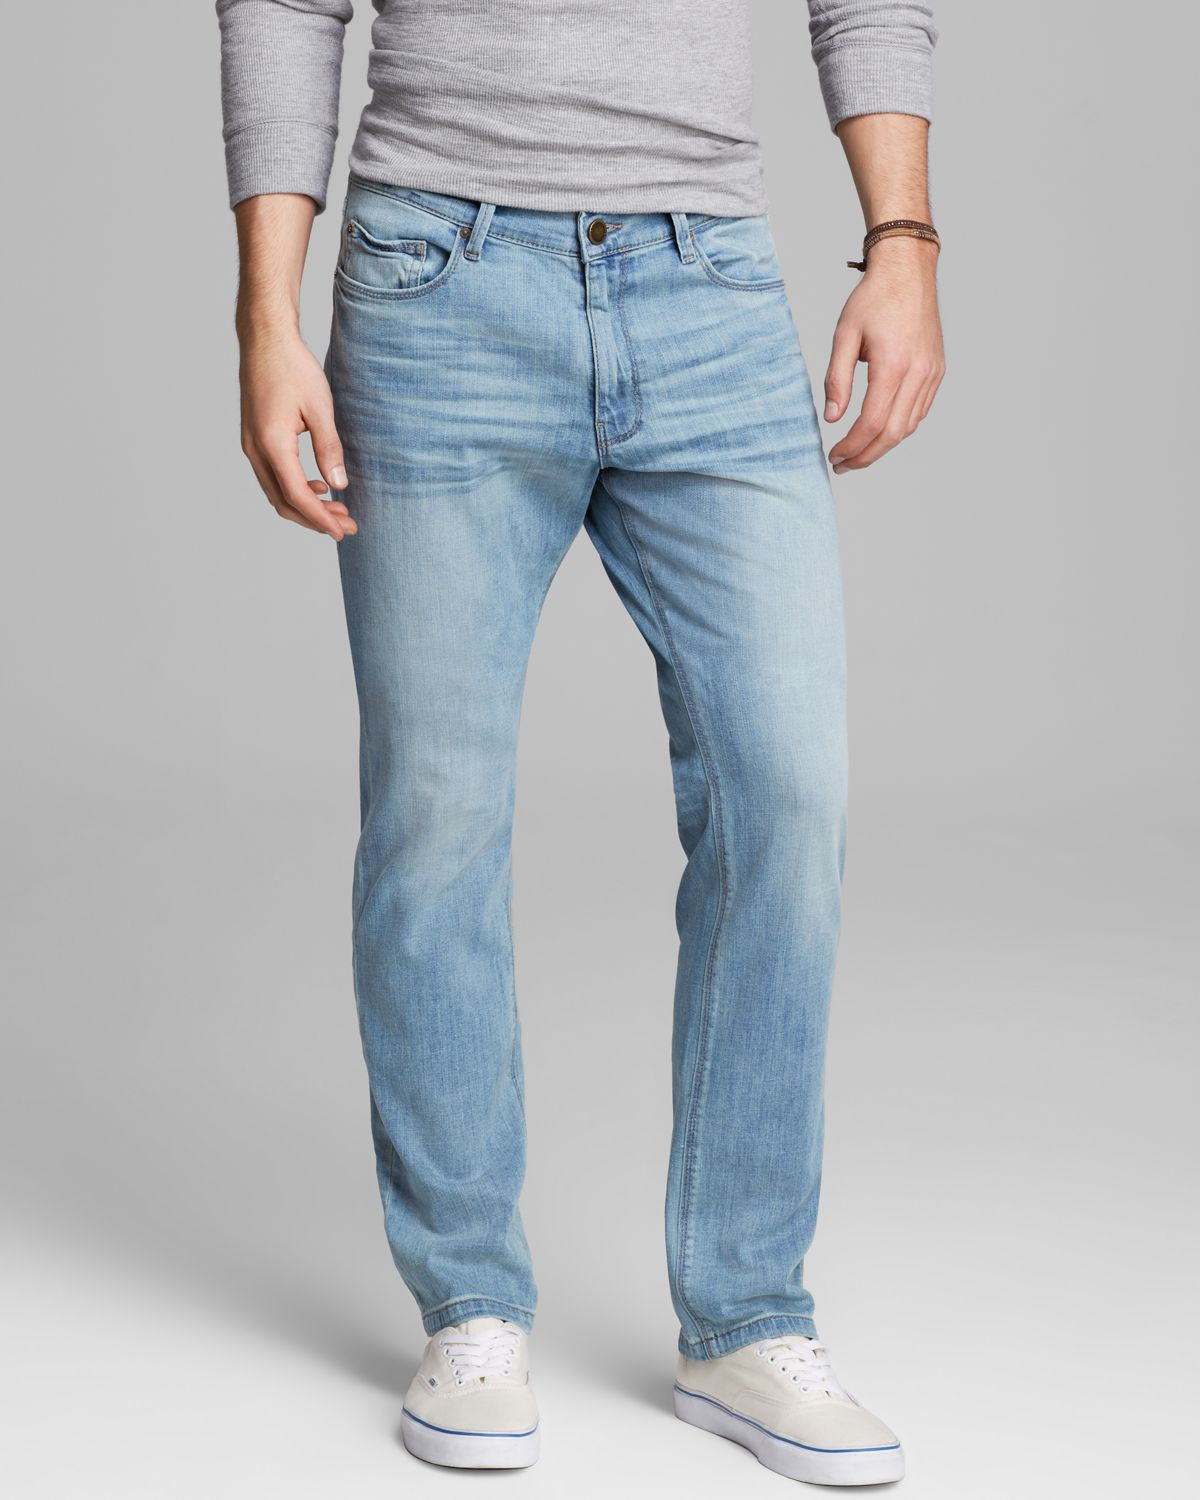 Lyst - Dl1961 Jeans Russell Slim Straight Fit in Piper in Blue for Men